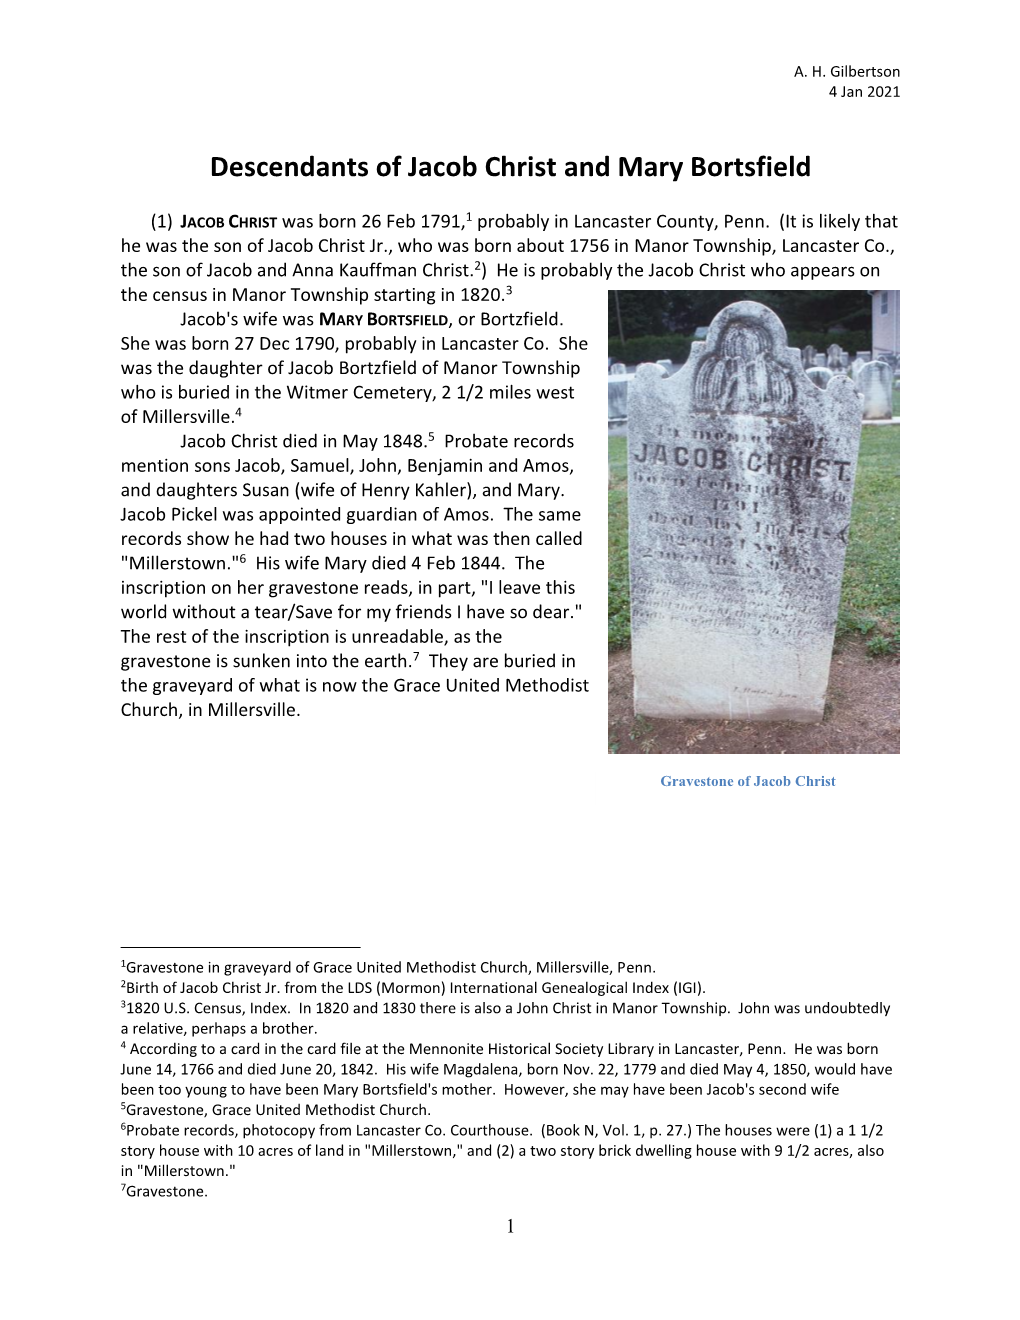 Descendants of Jacob Christ and Mary Bortsfield